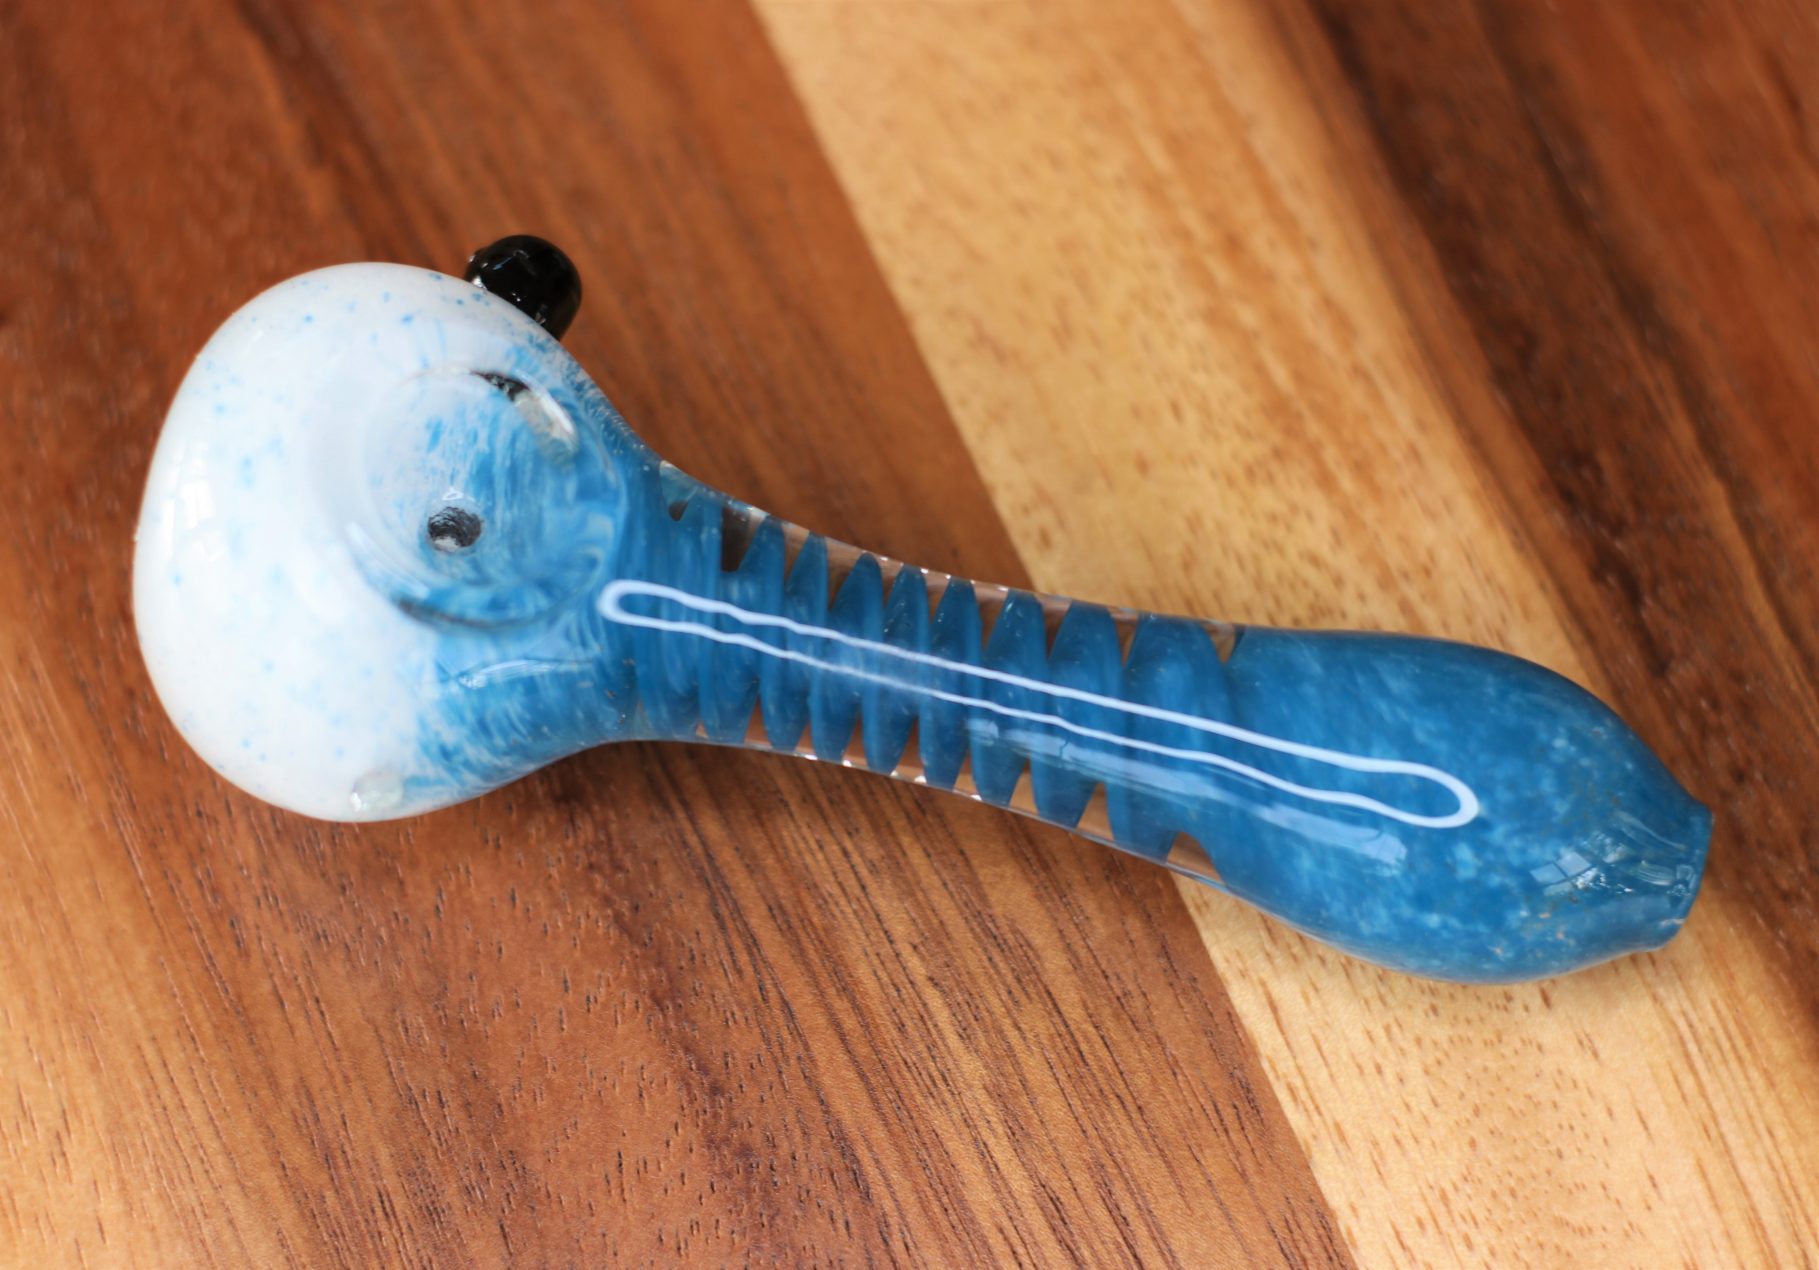 4.5 Inch Spiral & Frit Spoon Glass Weed Pipe Weed Bowl